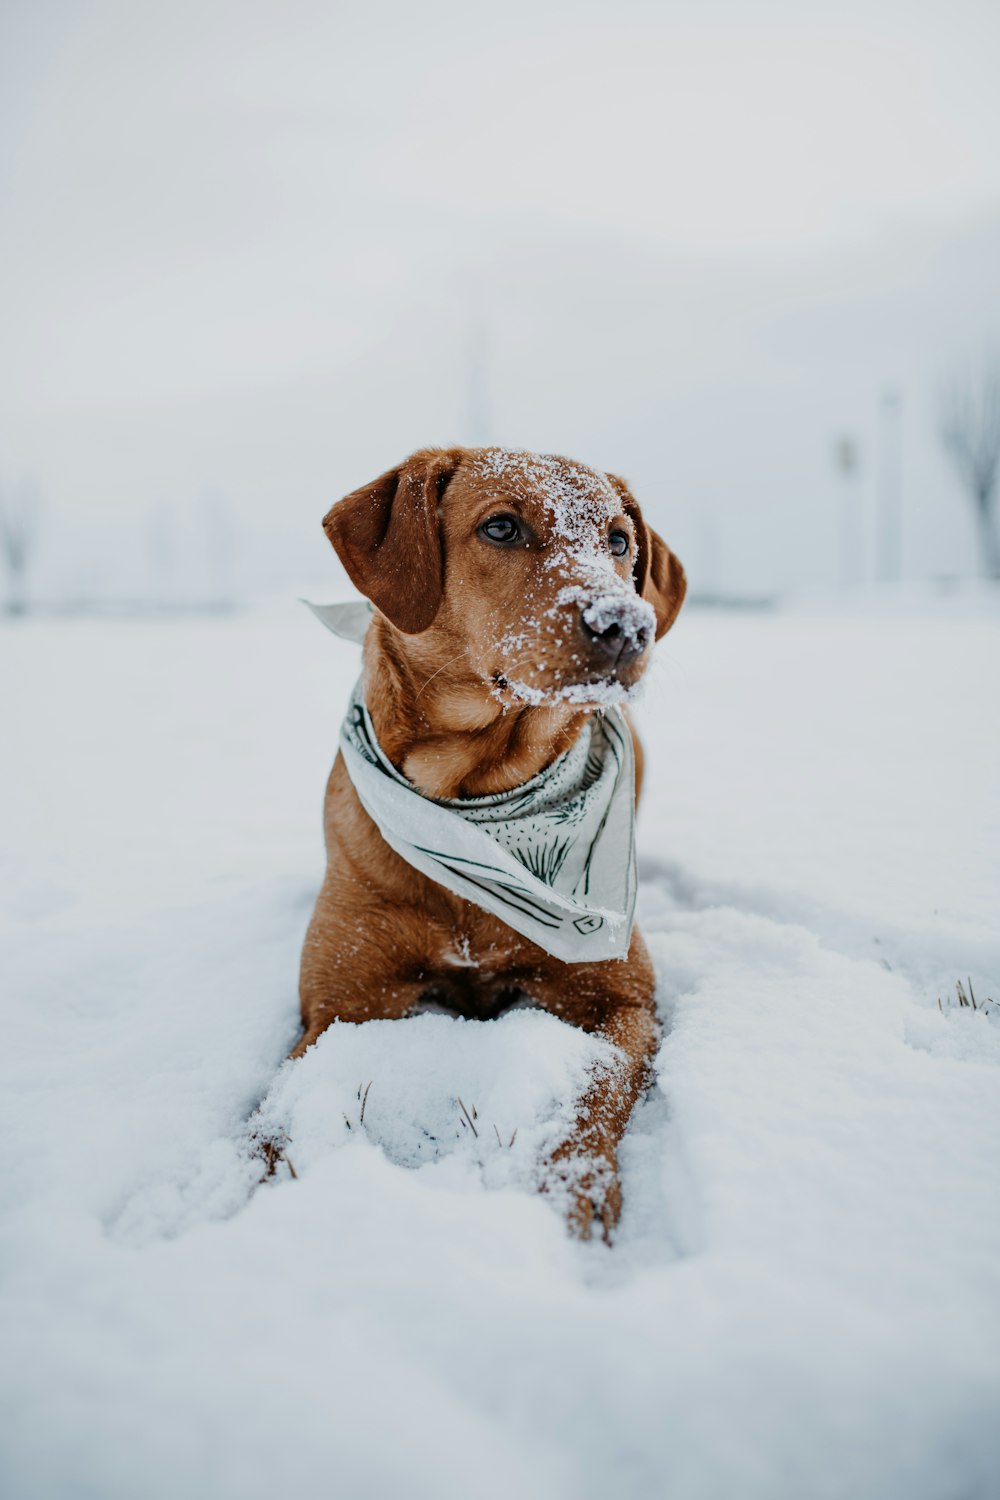 brown short coated dog in white and blue jacket on snow covered ground during daytime